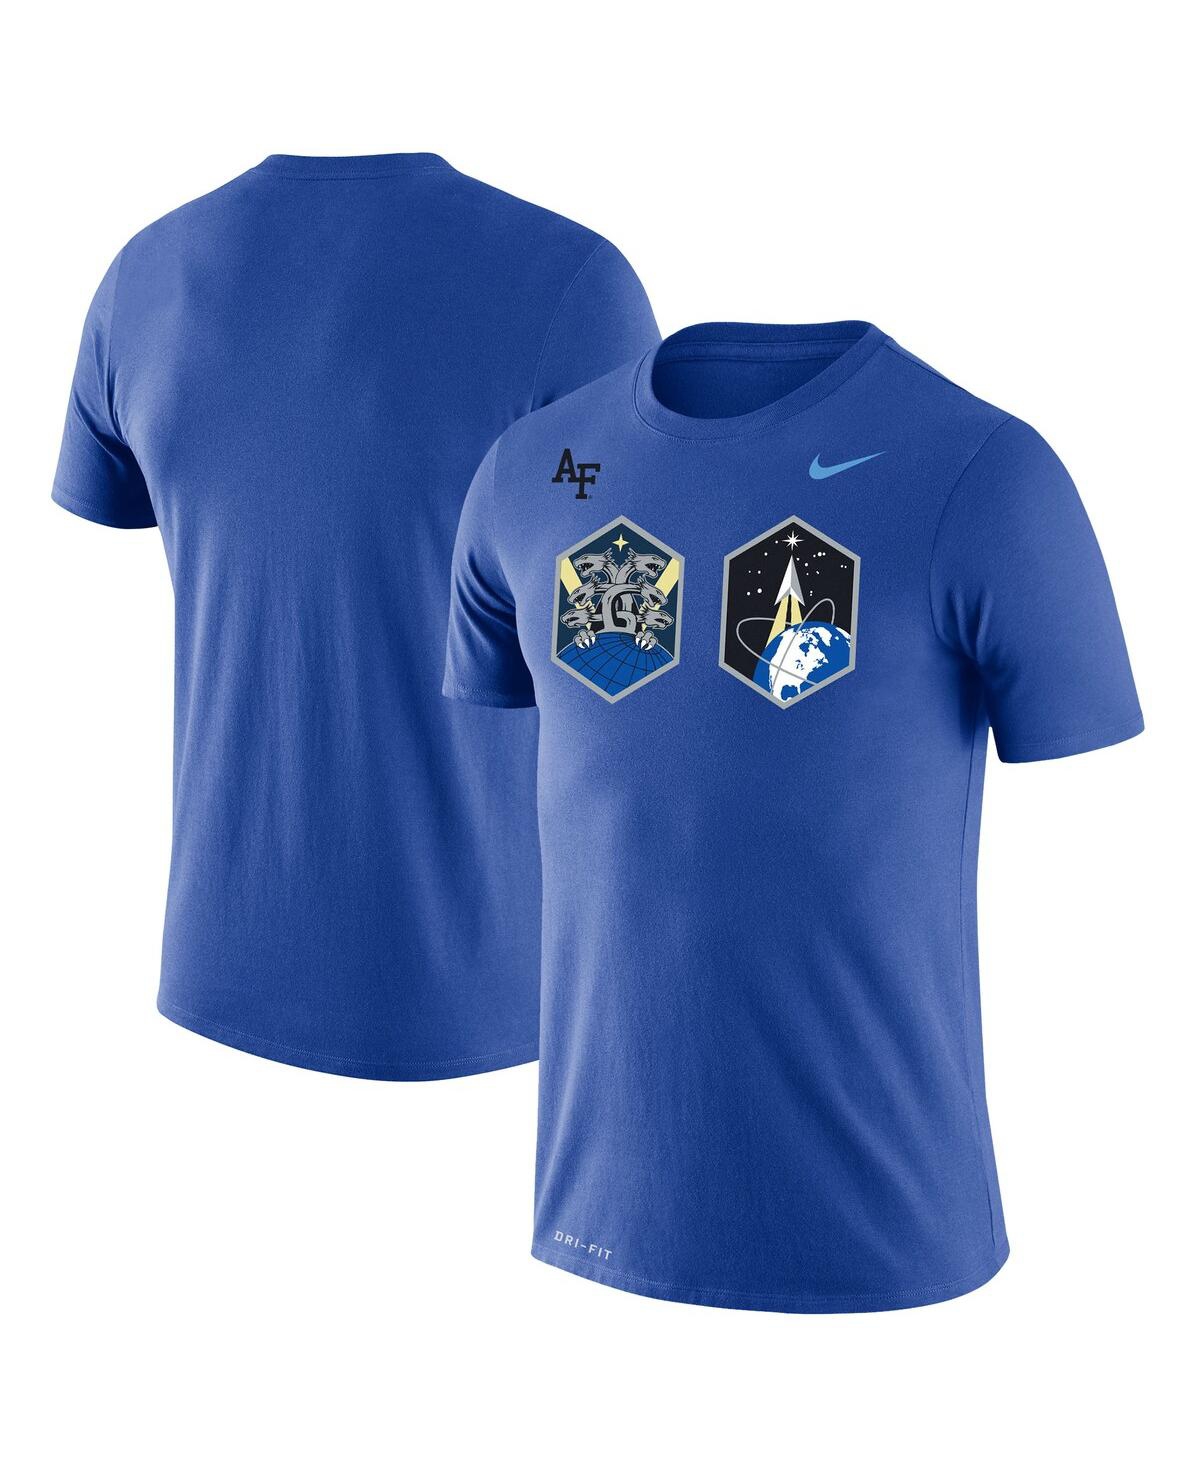 Men's Nike Royal Air Force Falcons Space Force Rivalry Badge T-shirt